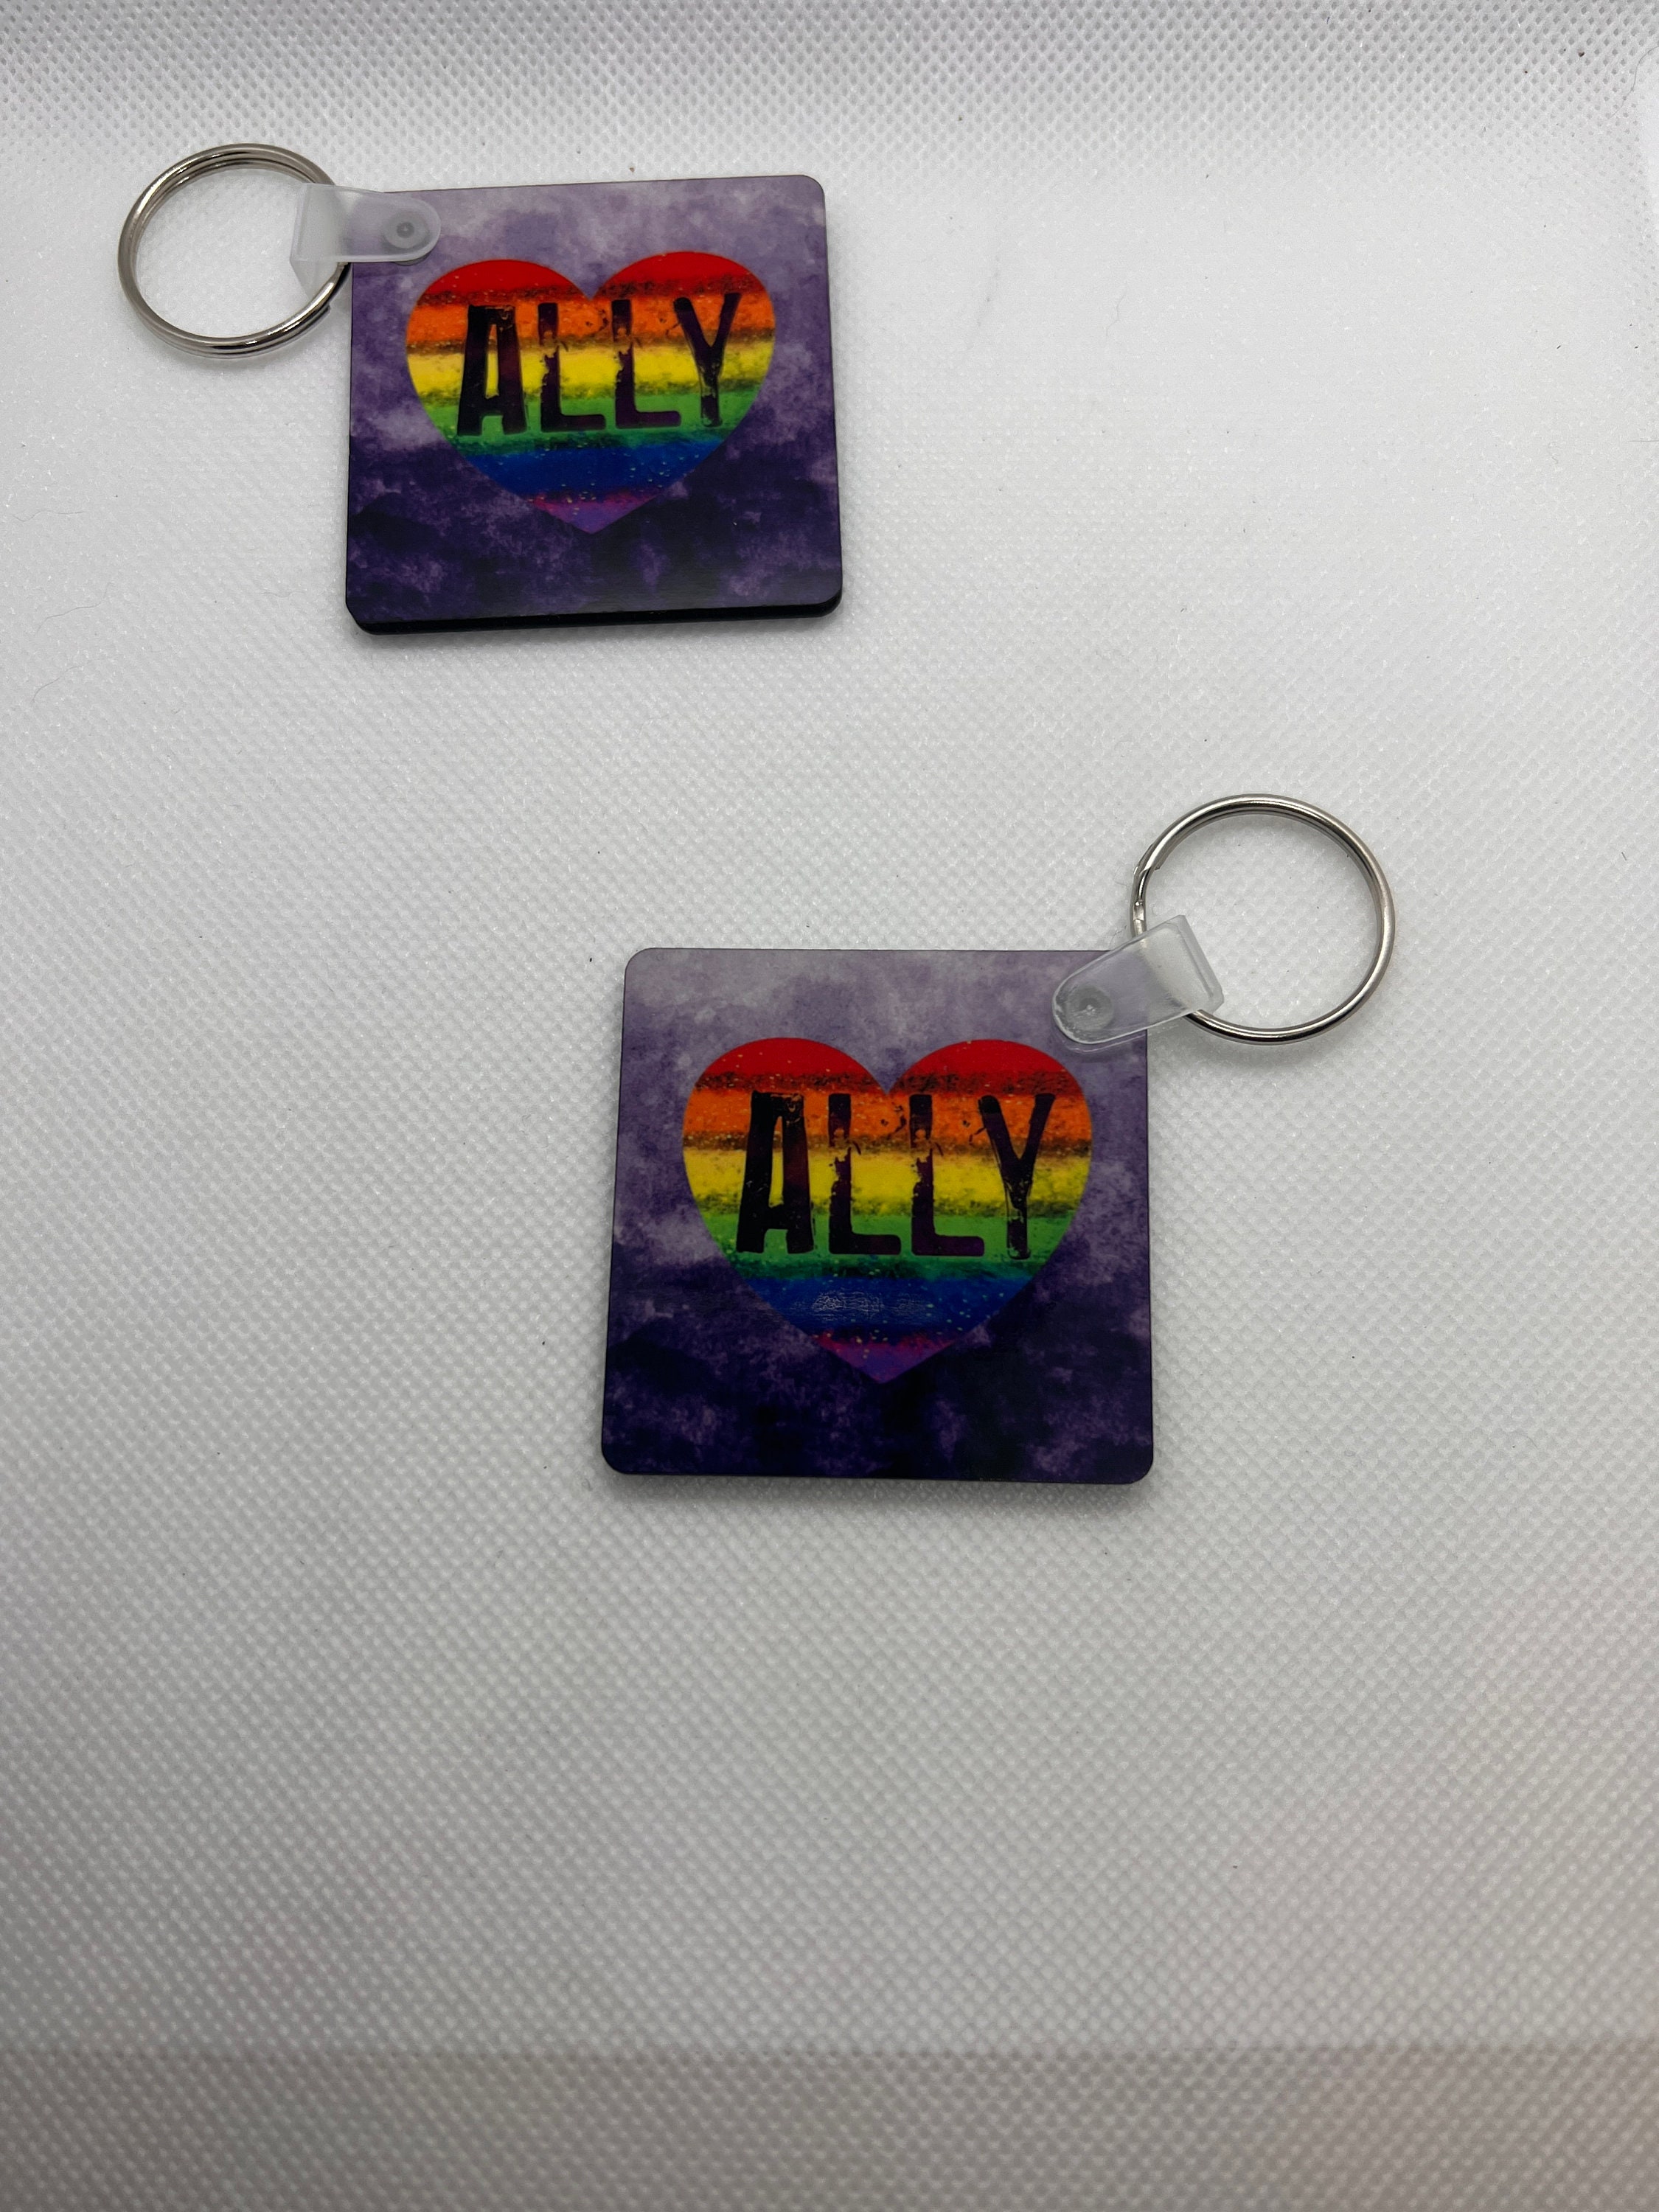 Keychains by Ally